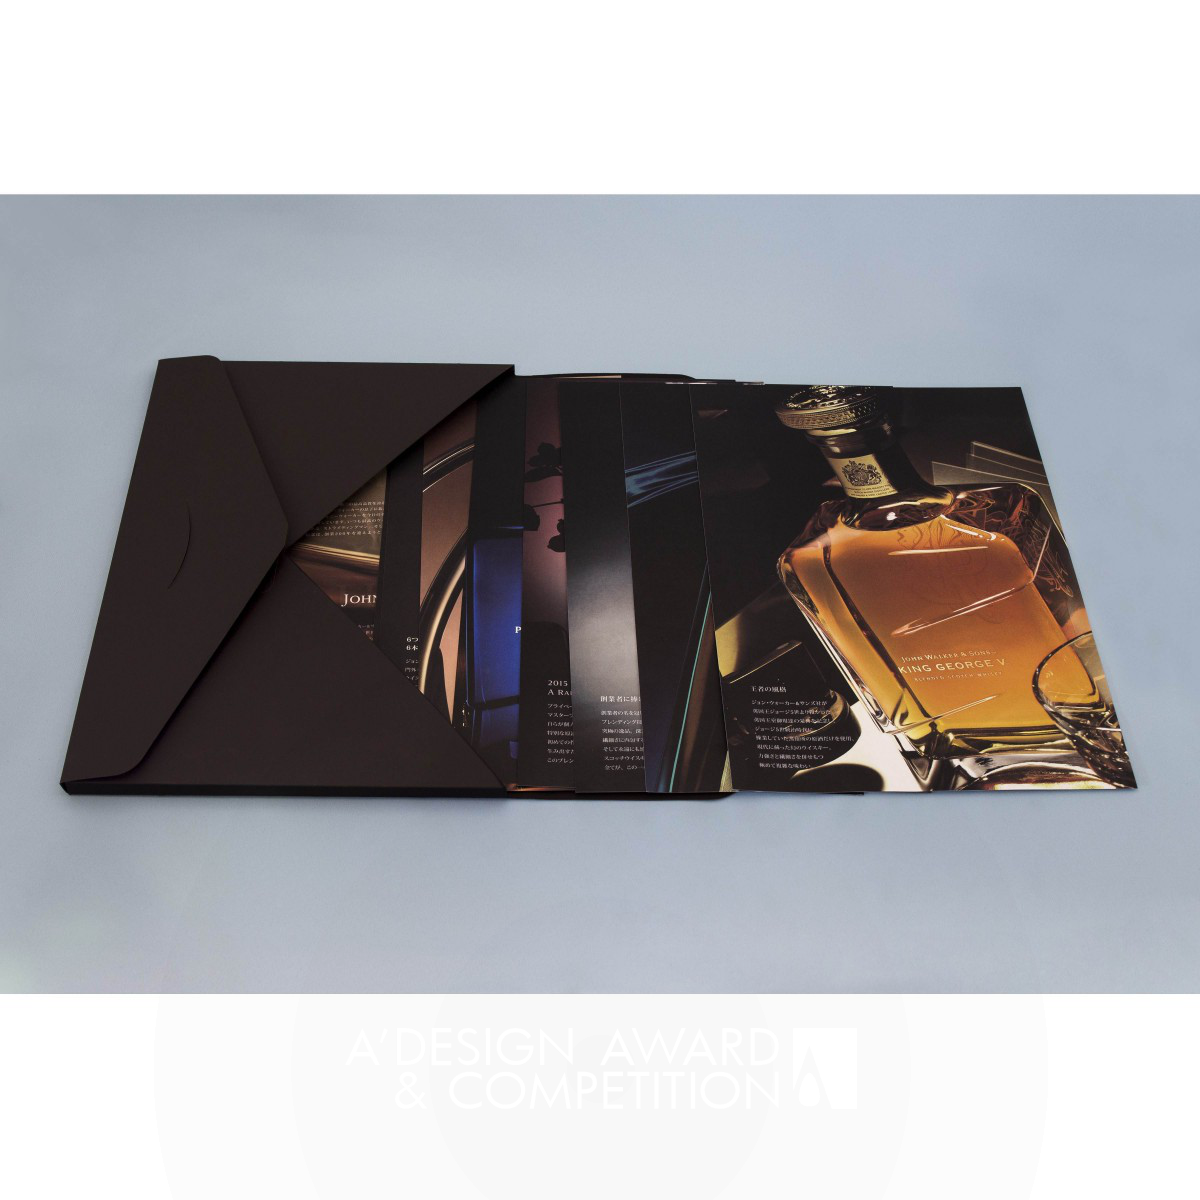 Johnnie Walker Pamphlet by E-graphics communications